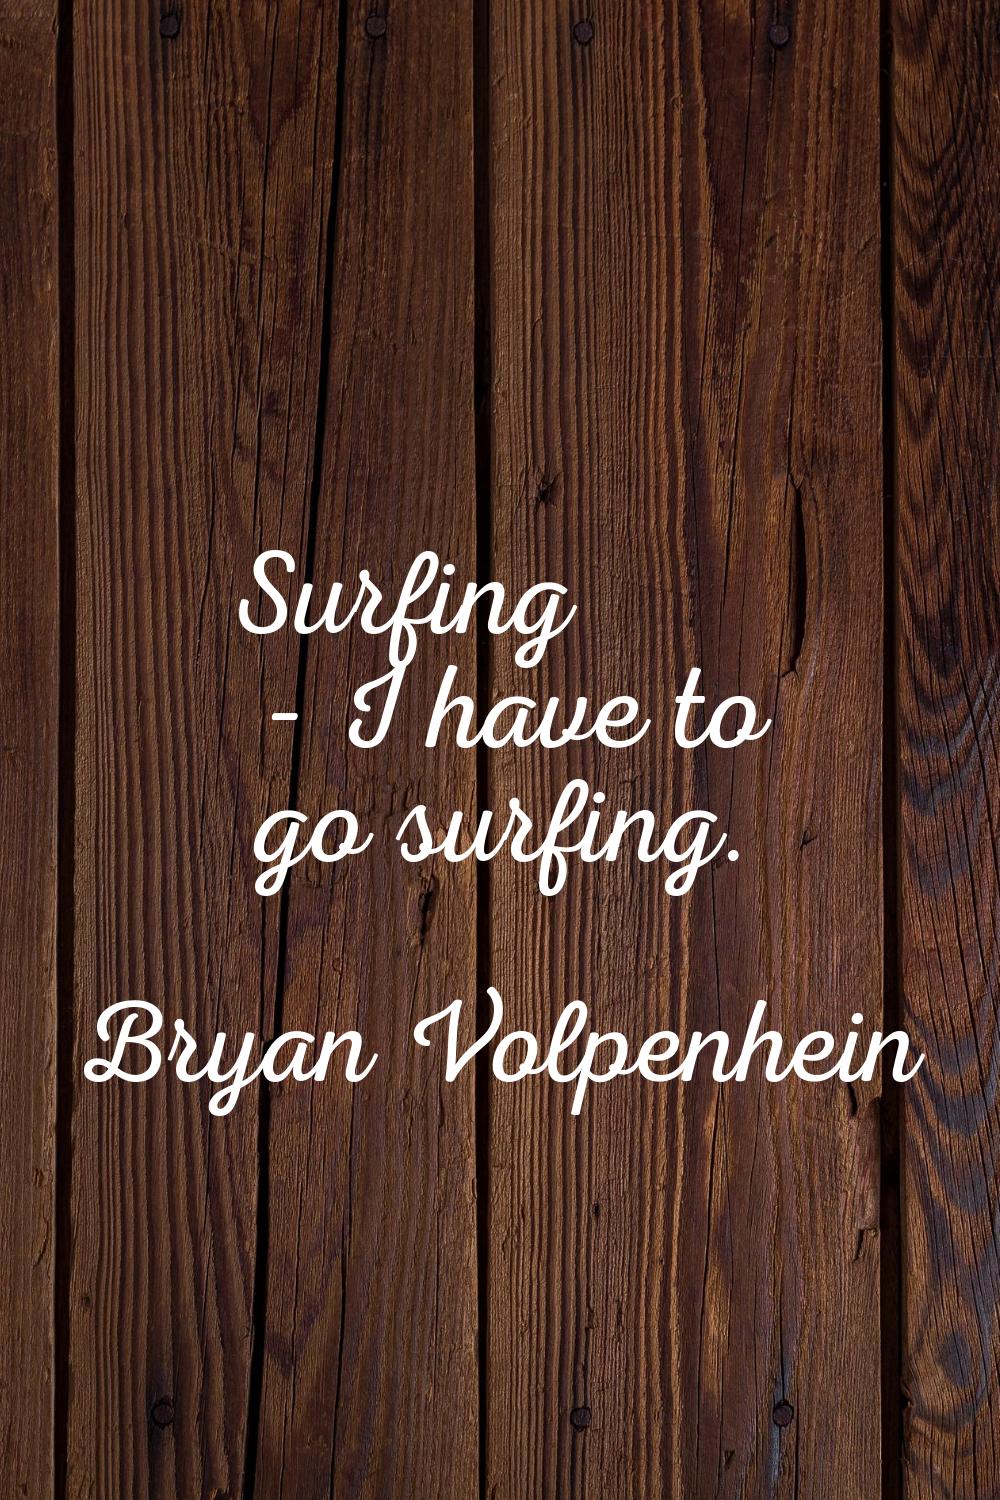 Surfing - I have to go surfing.